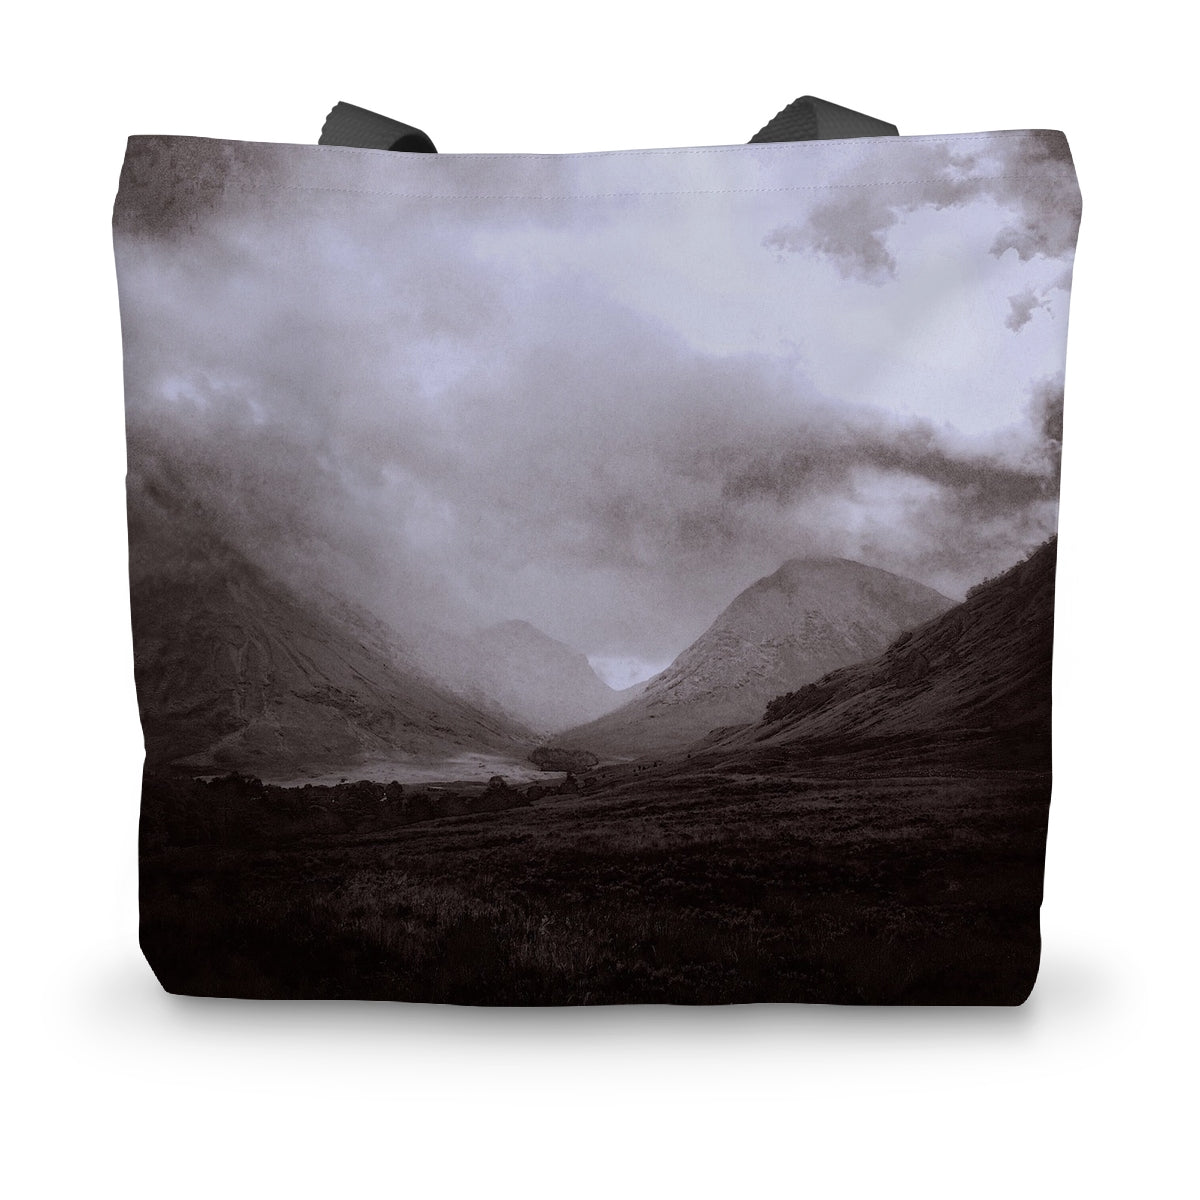 Glencoe Mist Art Gifts Canvas Tote Bag-Bags-Glencoe Art Gallery-14"x18.5"-Paintings, Prints, Homeware, Art Gifts From Scotland By Scottish Artist Kevin Hunter